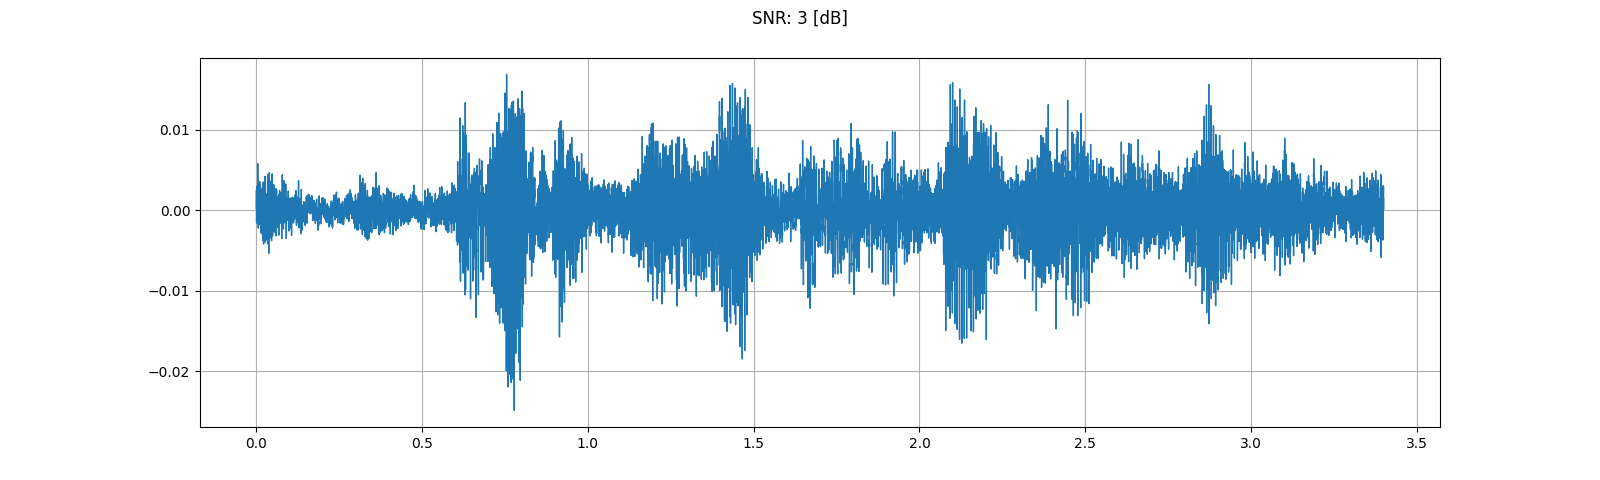 ../_images/sphx_glr_audio_preprocessing_tutorial_035.png